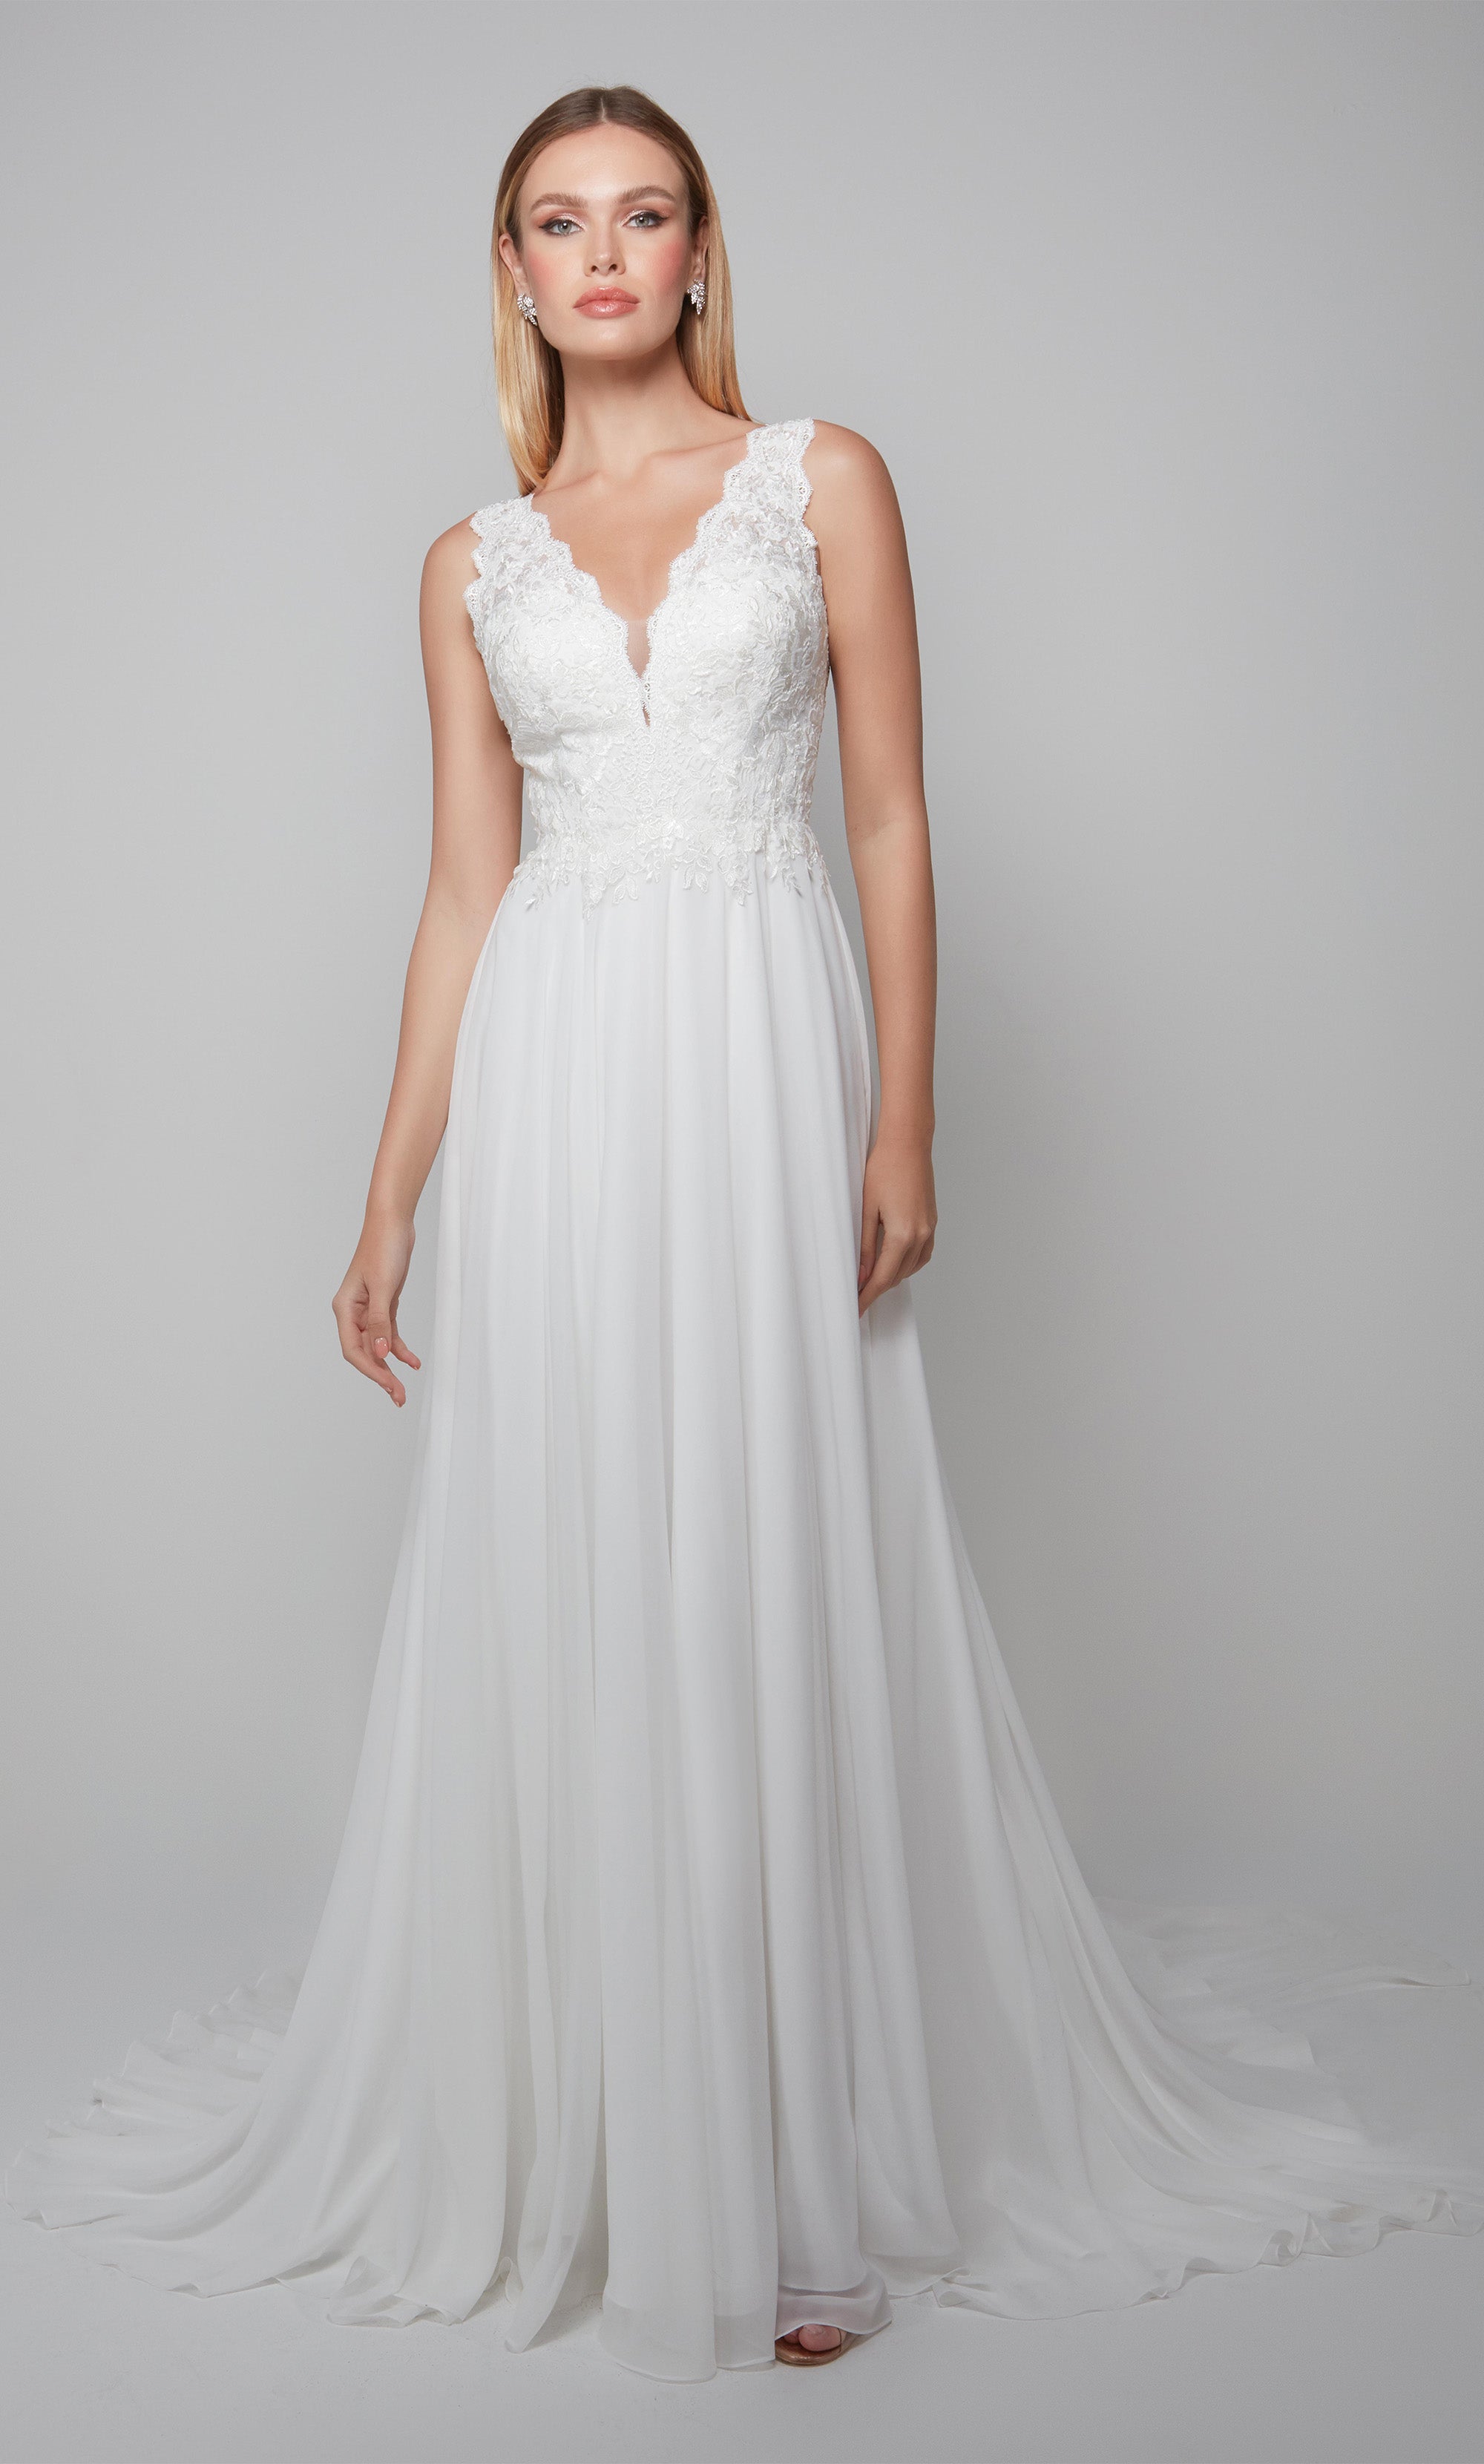 Sleeveless chiffon wedding dress with an elegant lace bodice in ivory. Color-SWATCH_7071__IVORY